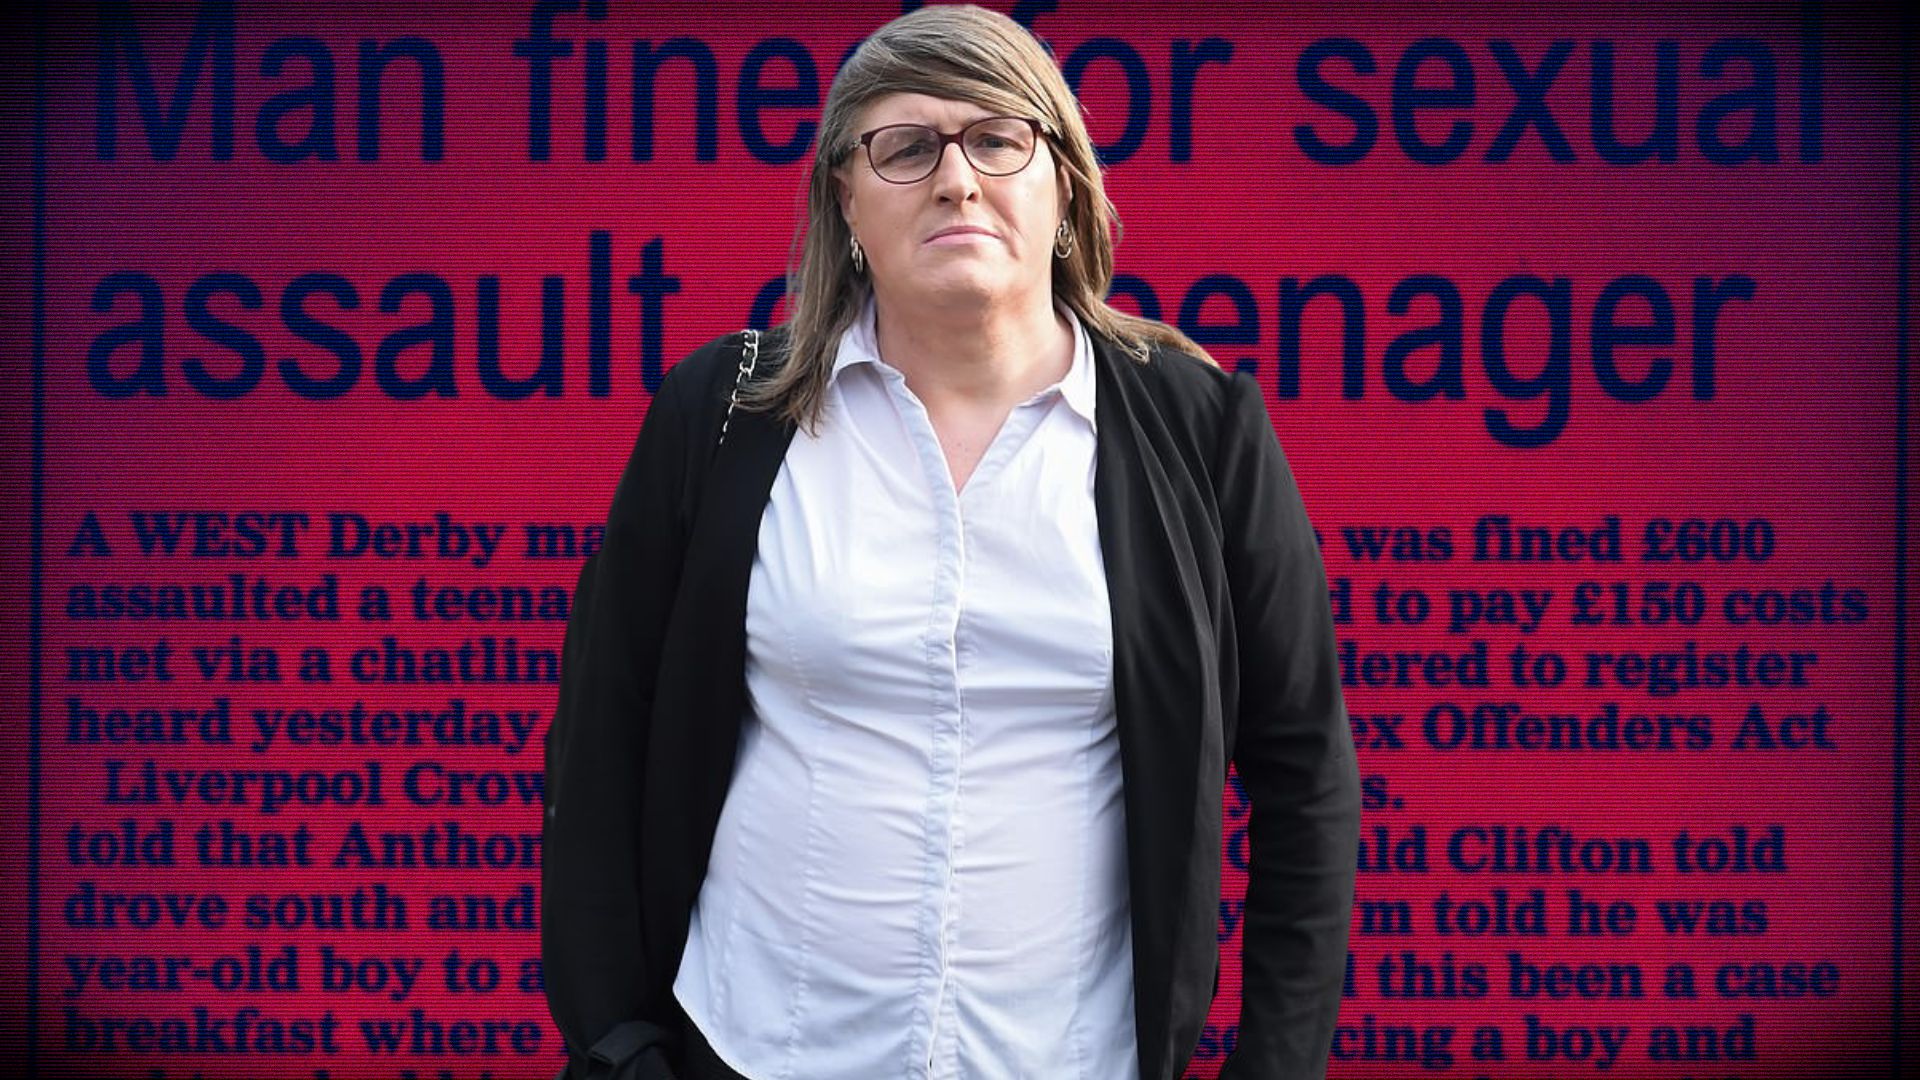 UK: Prominent Trans Activist Known For Having Opponents Arrested Has History Of Indecent Assault On 14-Year-Old Boy - Reduxx